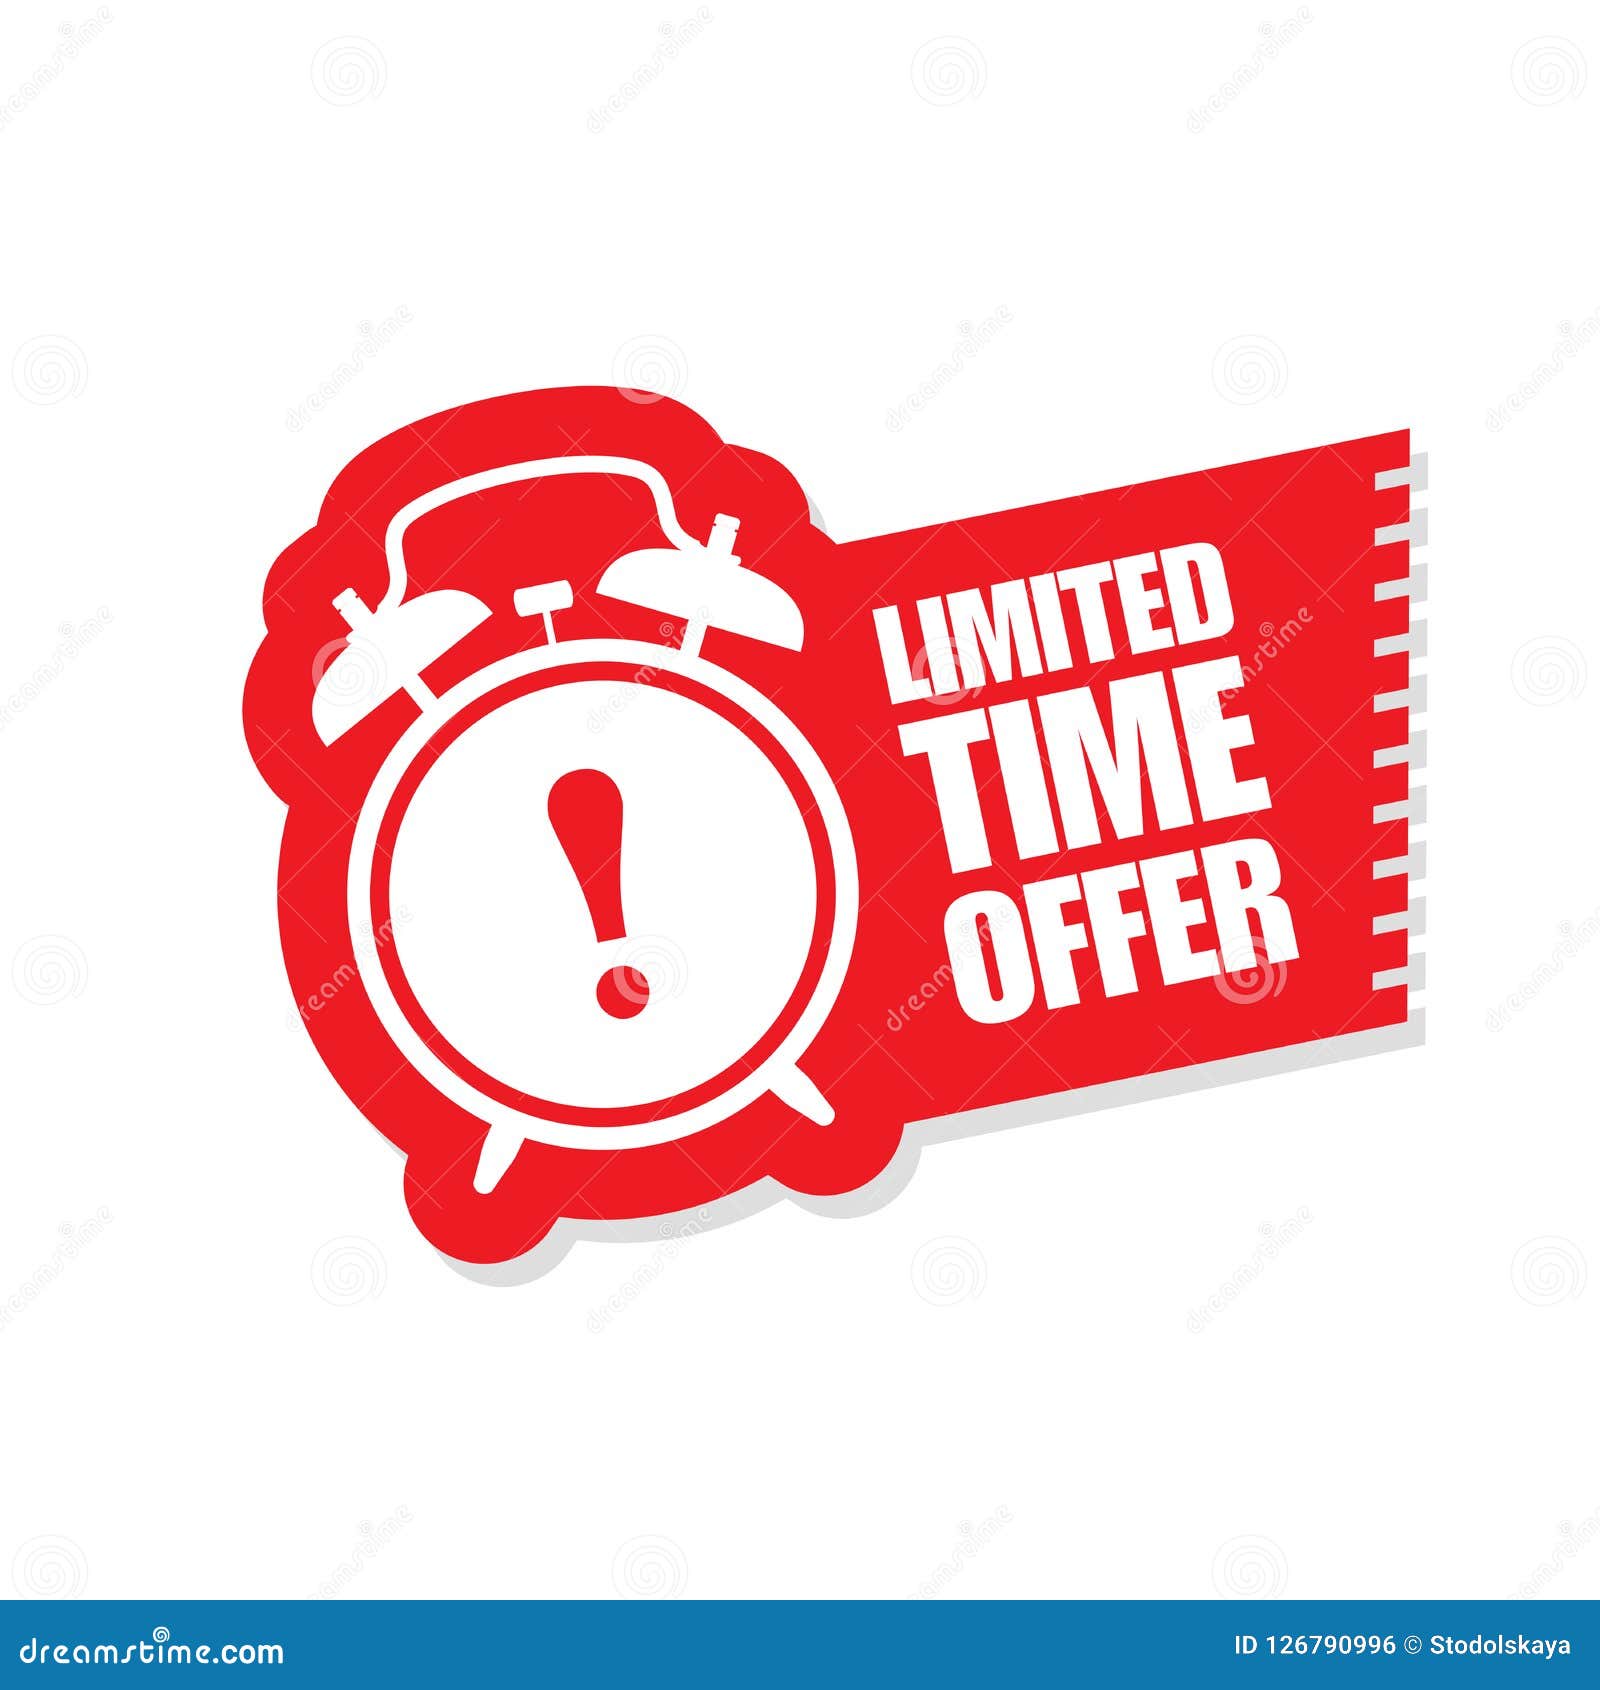 https://thumbs.dreamstime.com/z/limited-time-offer-sticker-ringing-alarm-clock-limited-time-offer-sticker-ringing-alarm-clock-sale-symbol-126790996.jpg